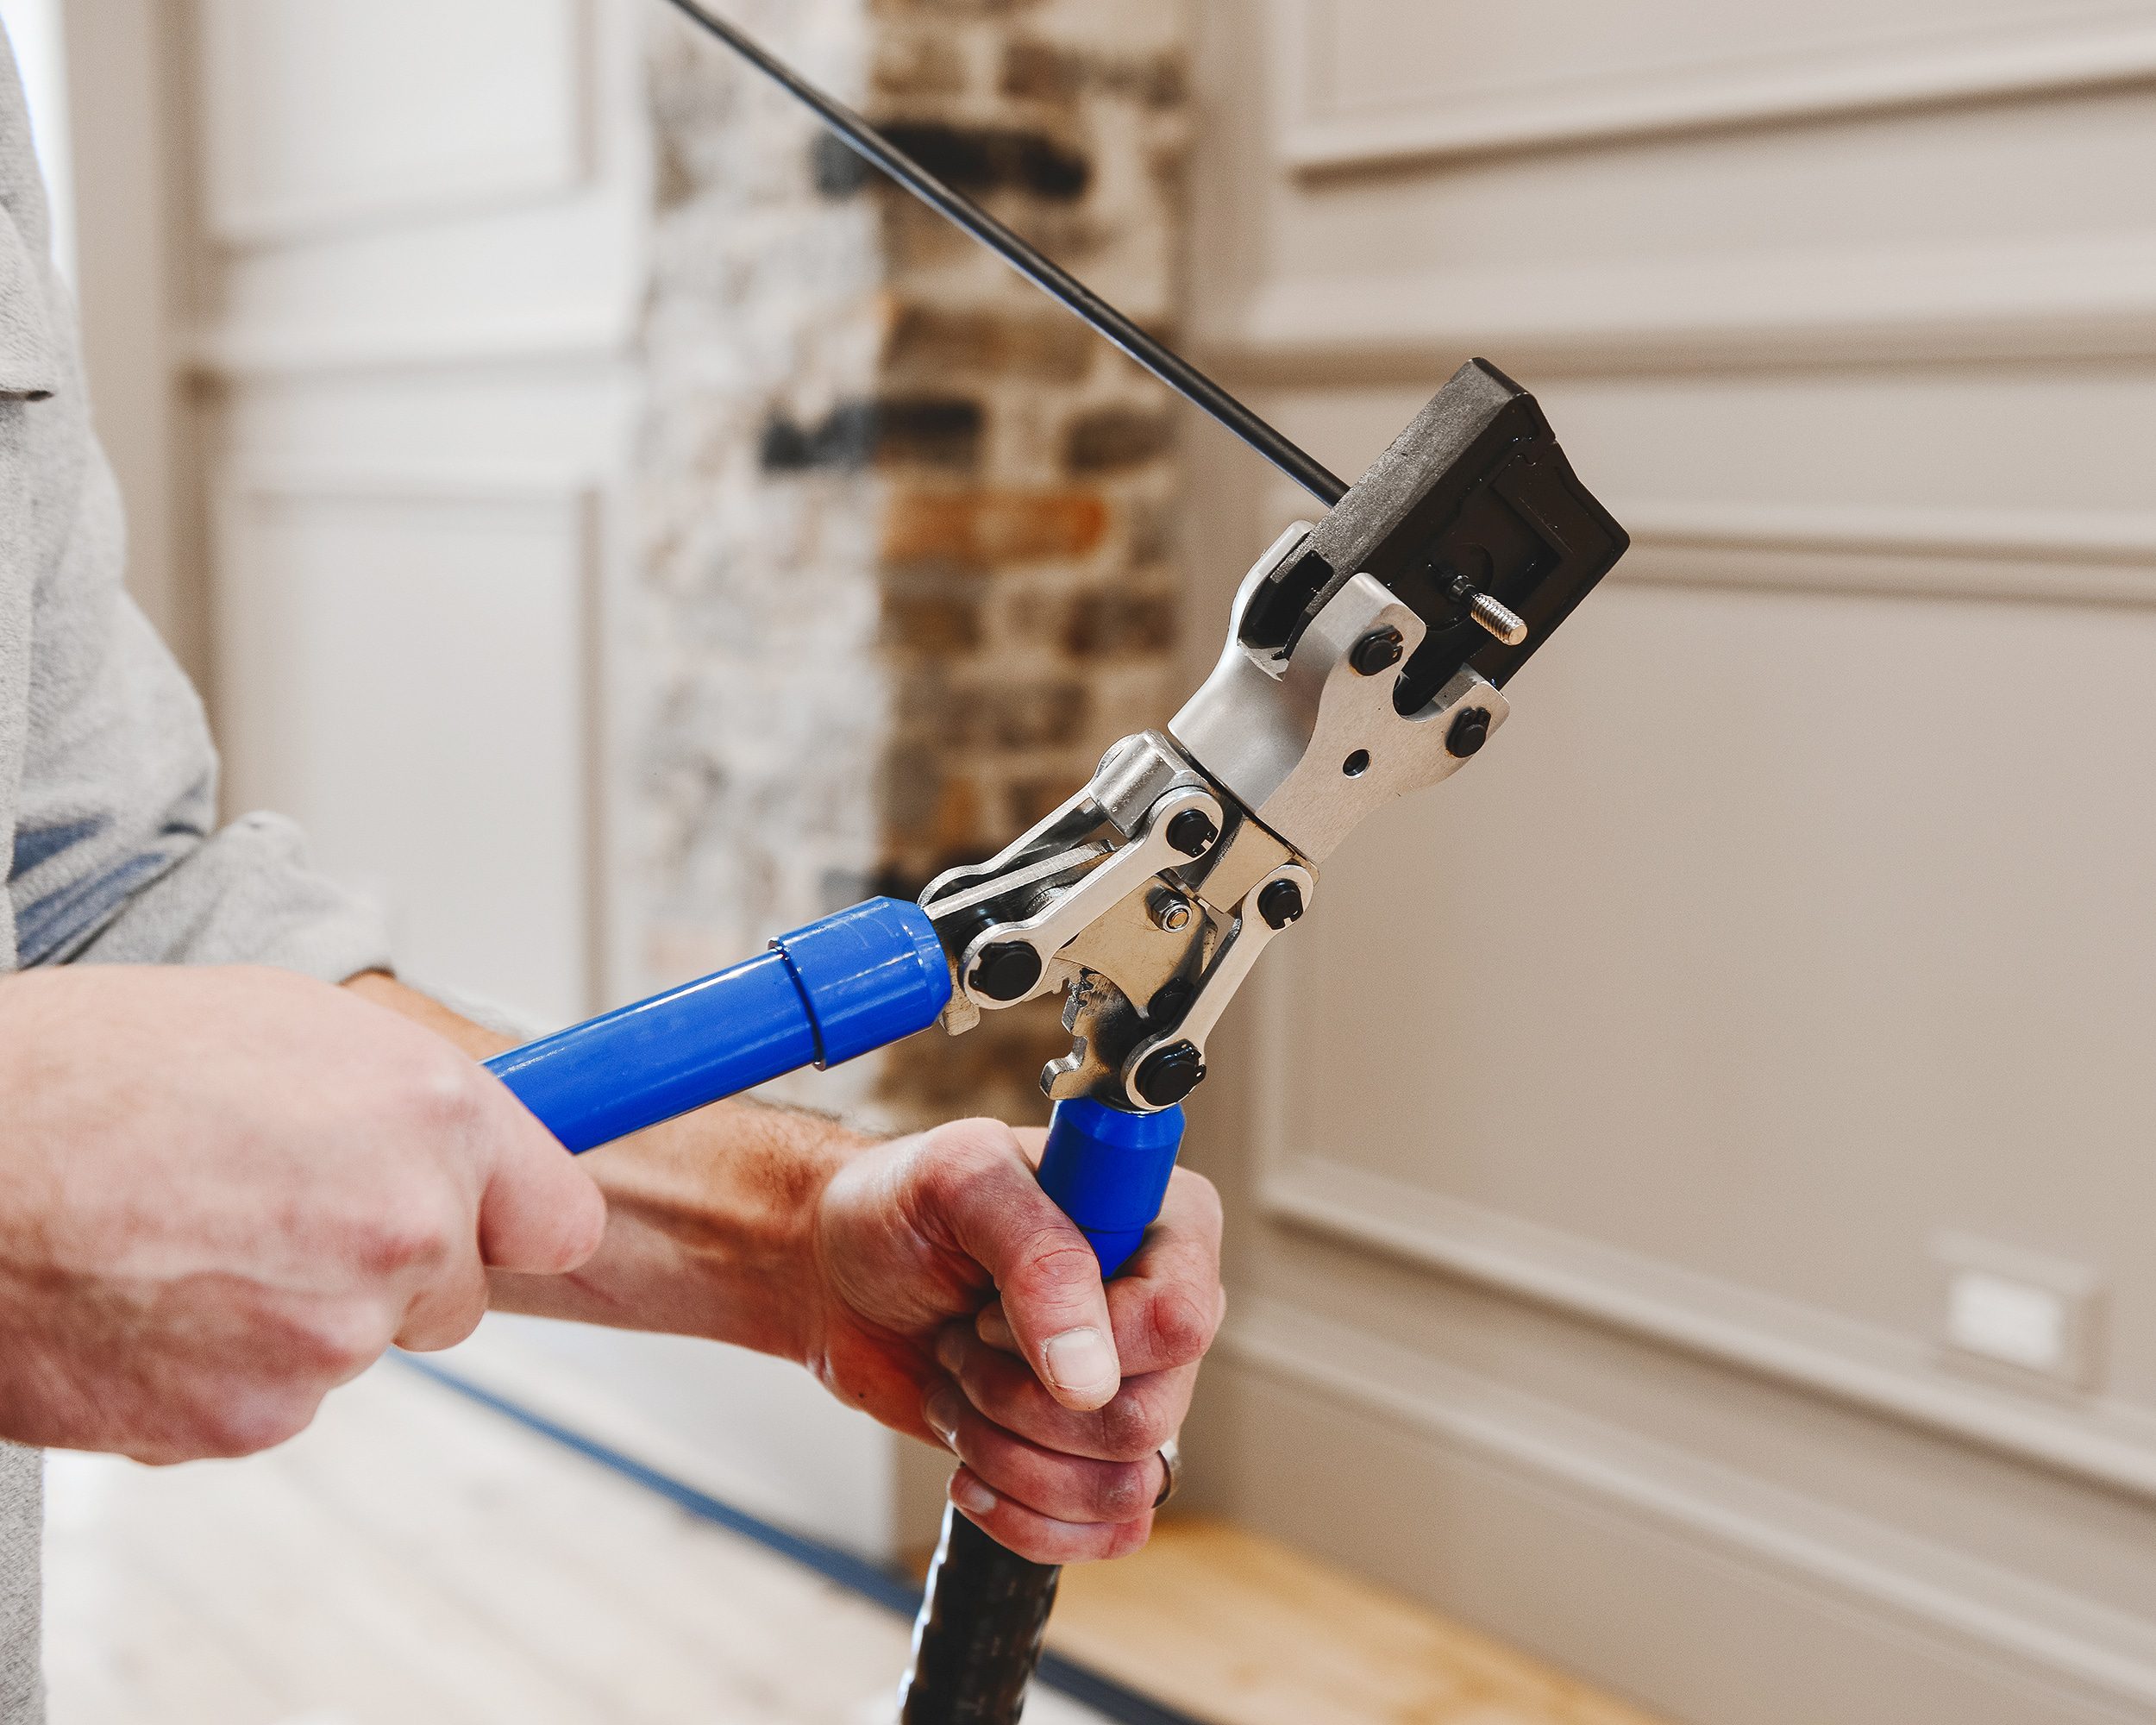 A crimper tool is used to install fasteners onto the rod components of a kitchen railing. | via Yellow Brick Home